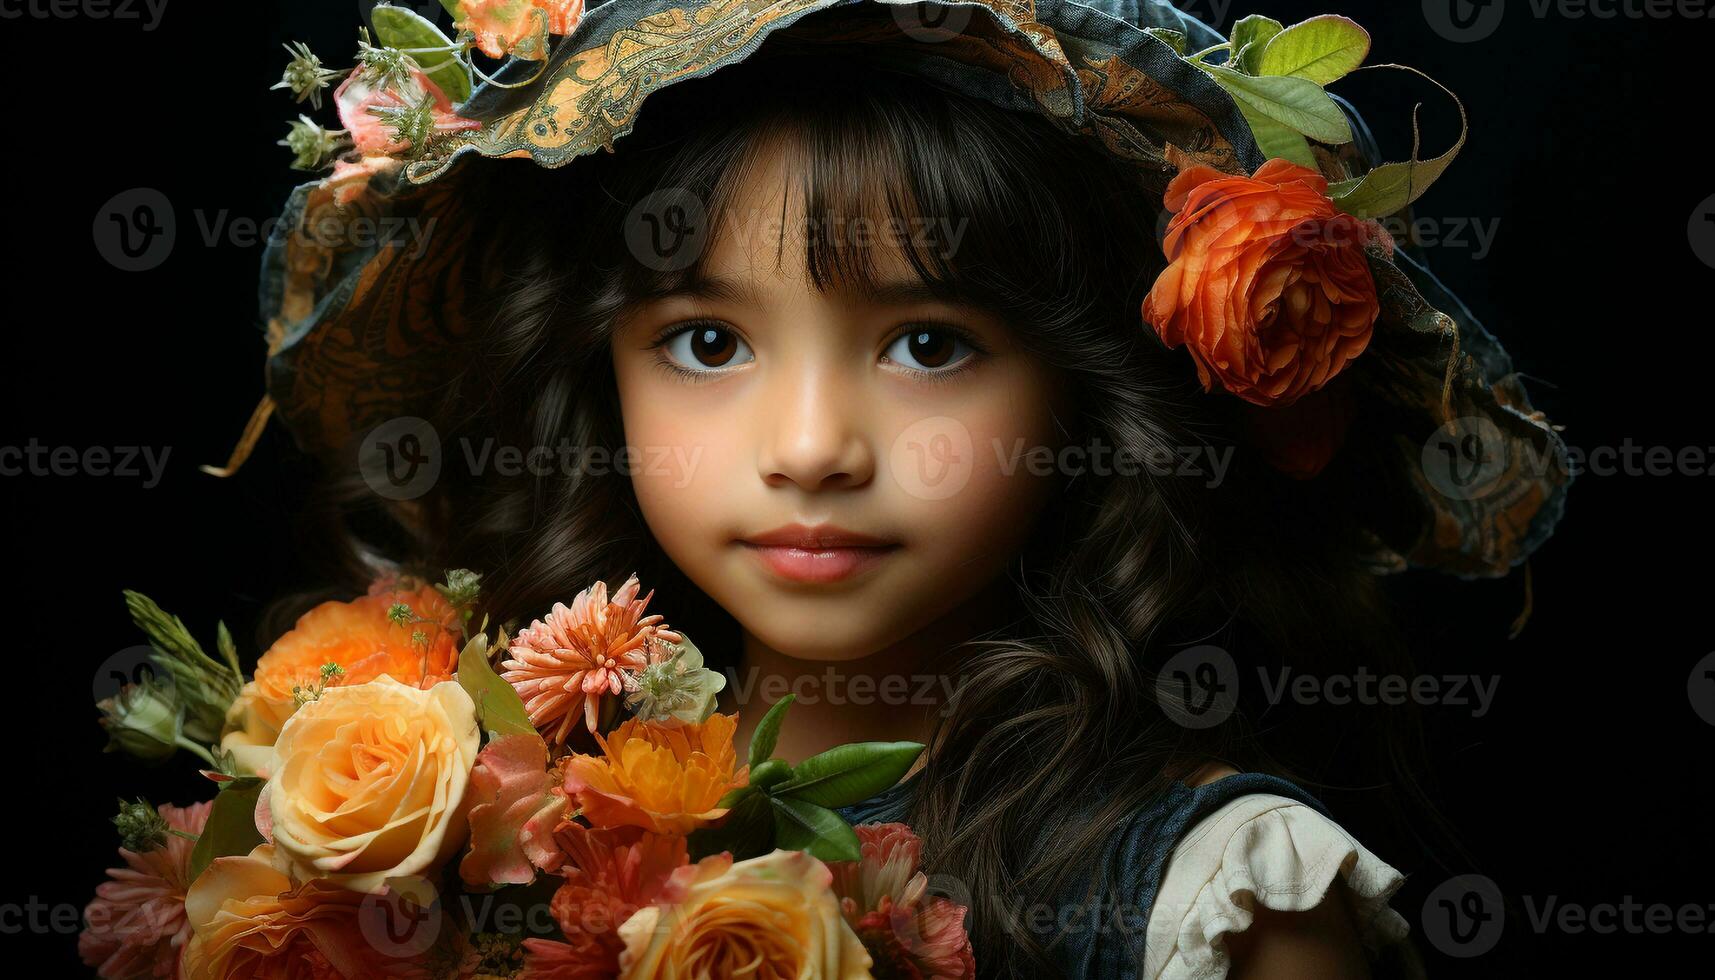 Smiling girls in cute dresses hold a small flower bouquet generated by AI photo